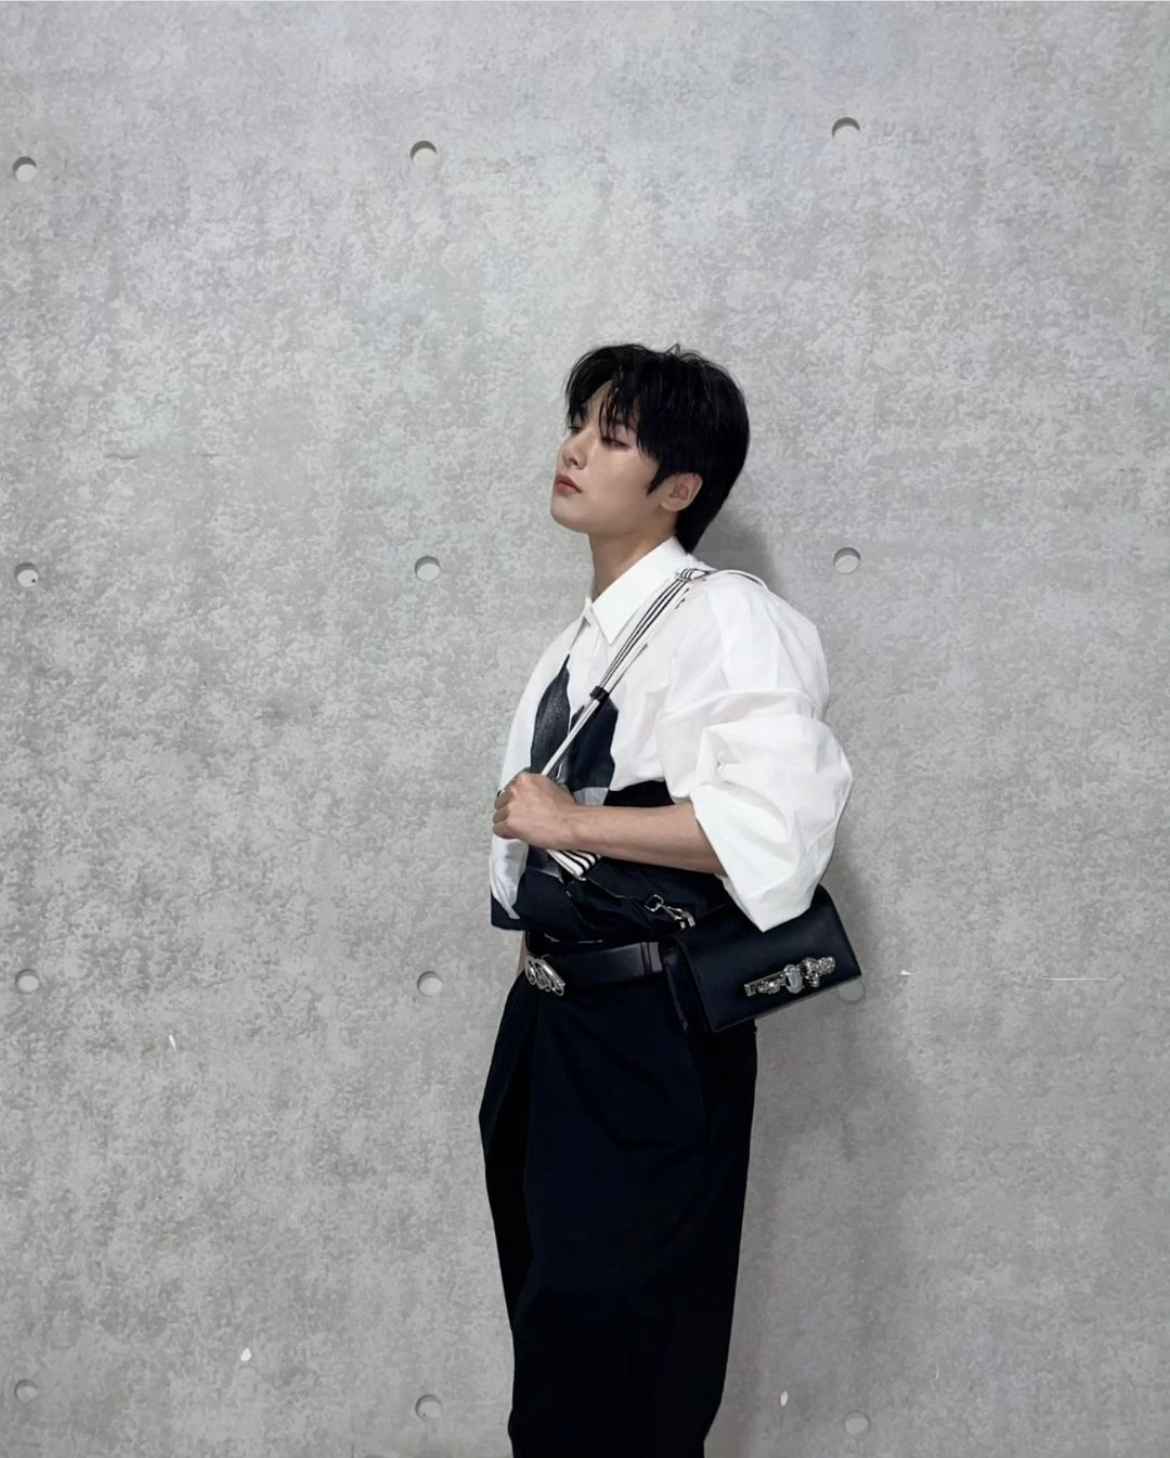 I.N (JEONGIN) FROM STRAY KIDS WEARING THE KNUCKLE SATCHEL